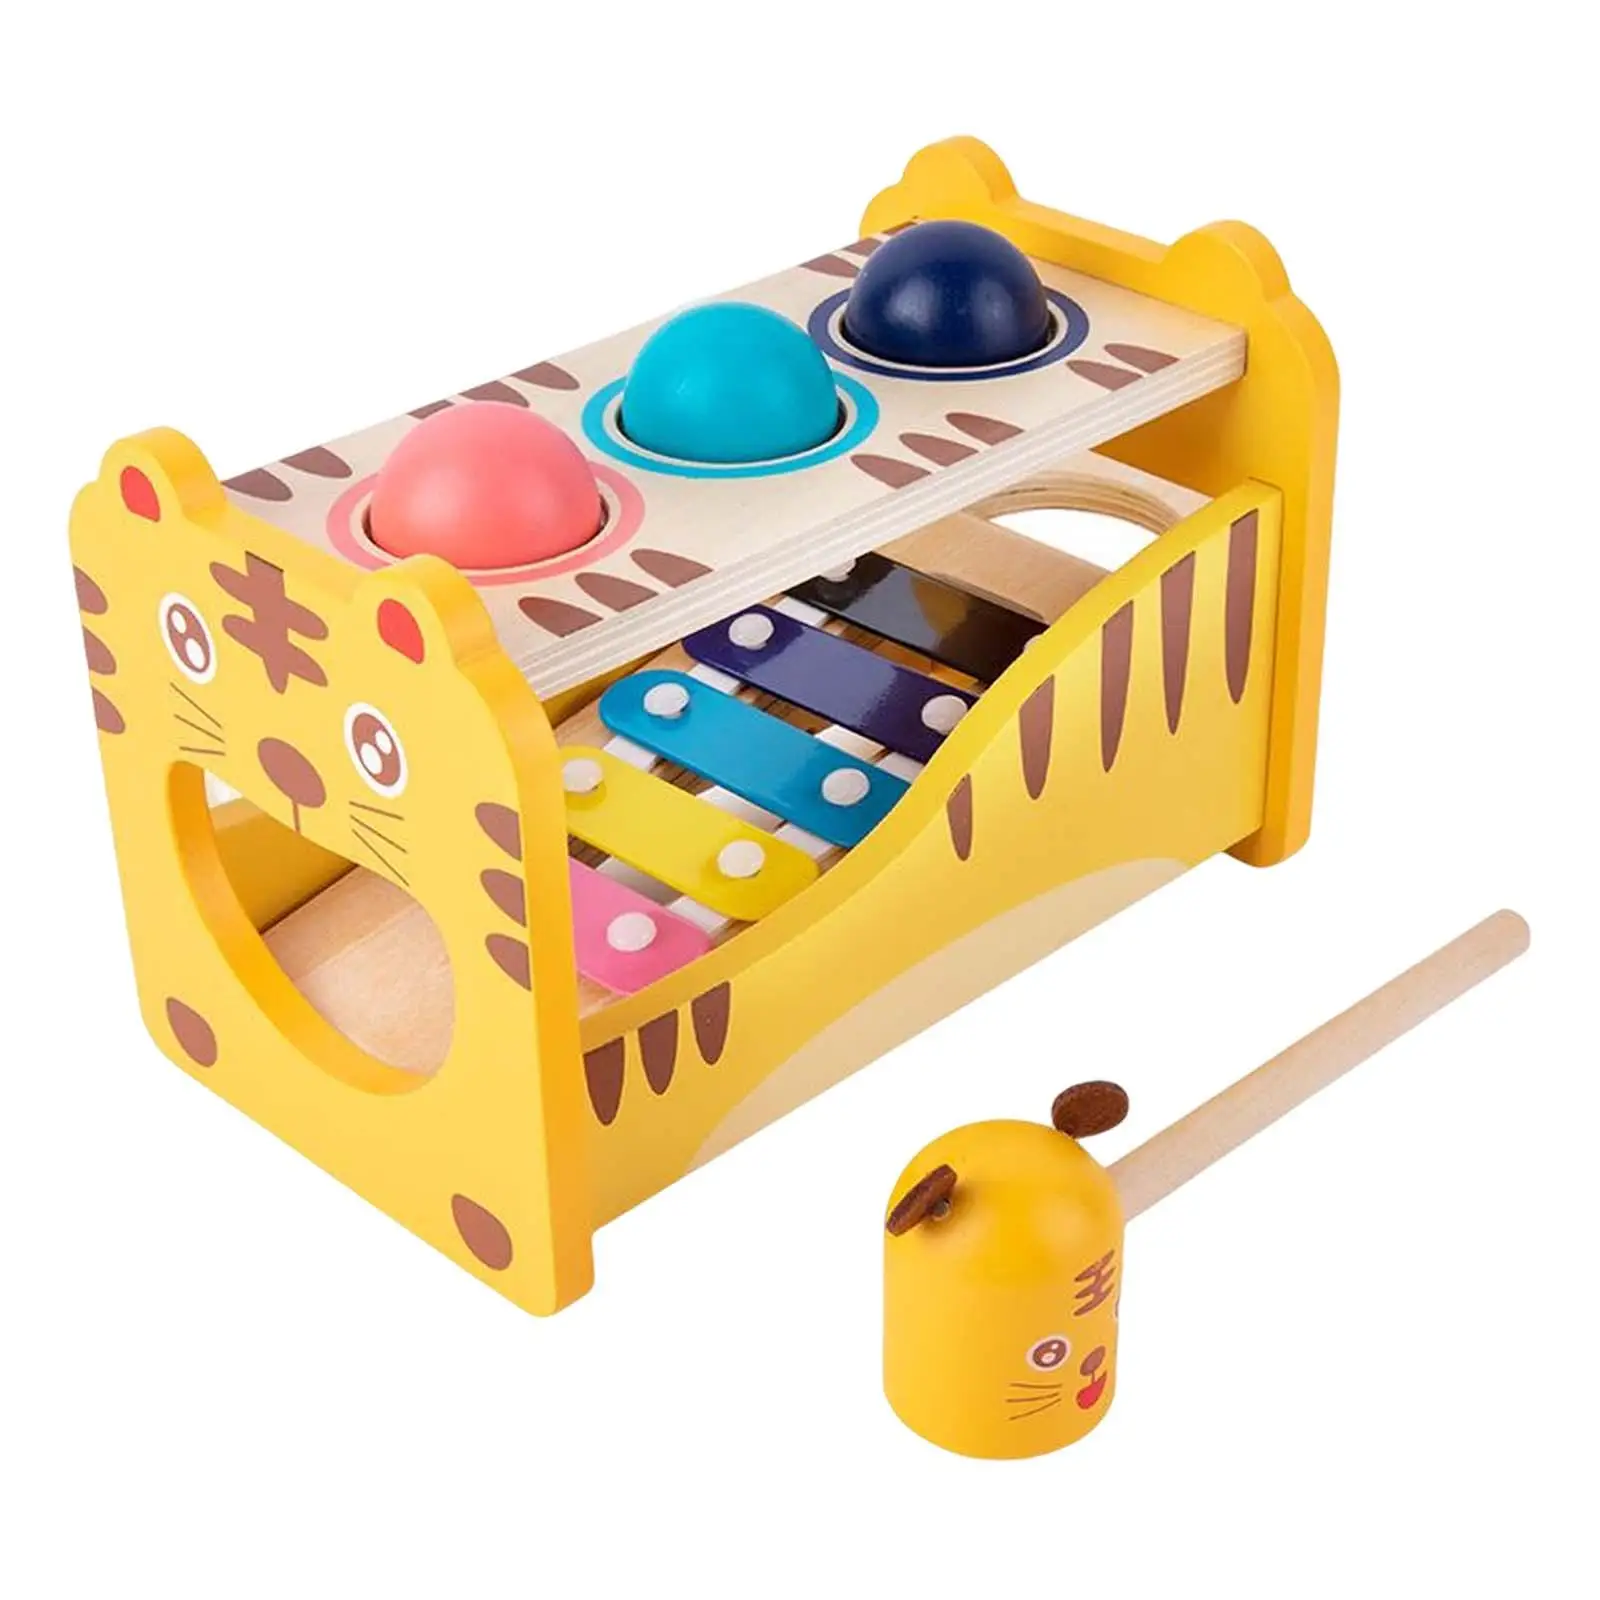 Wooden Musical Pounding toys color Recognition Developmental Hammering Toys for Boy